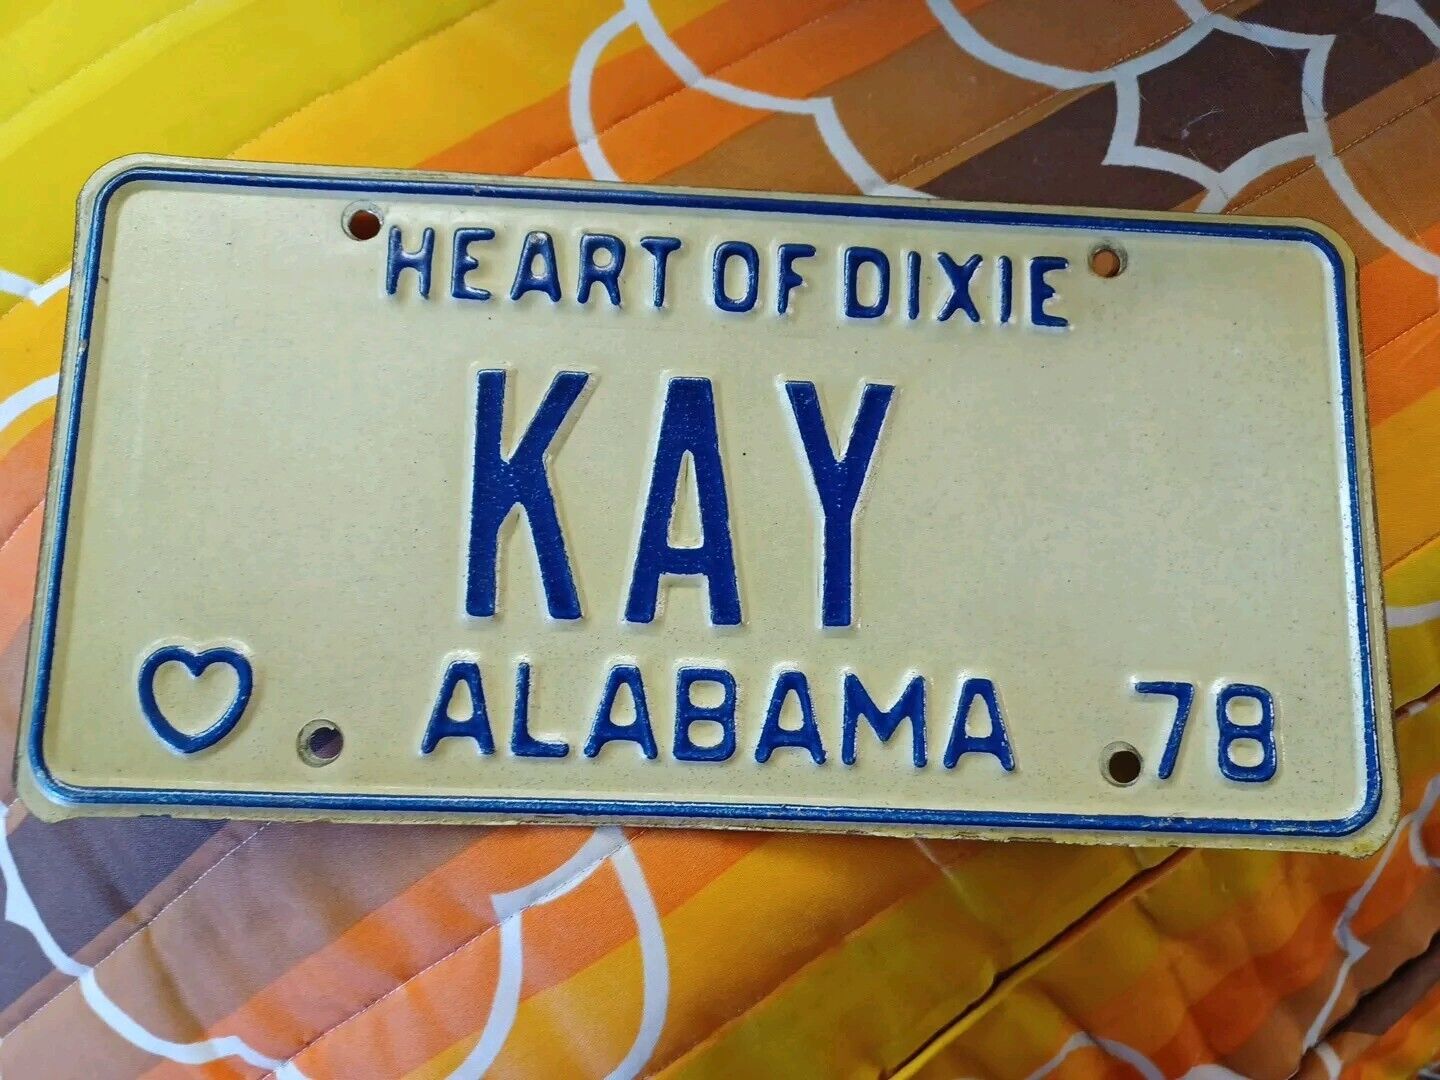 1978 Alabama HEART OF DIXIE MOTOR VEHICLE License Plate 